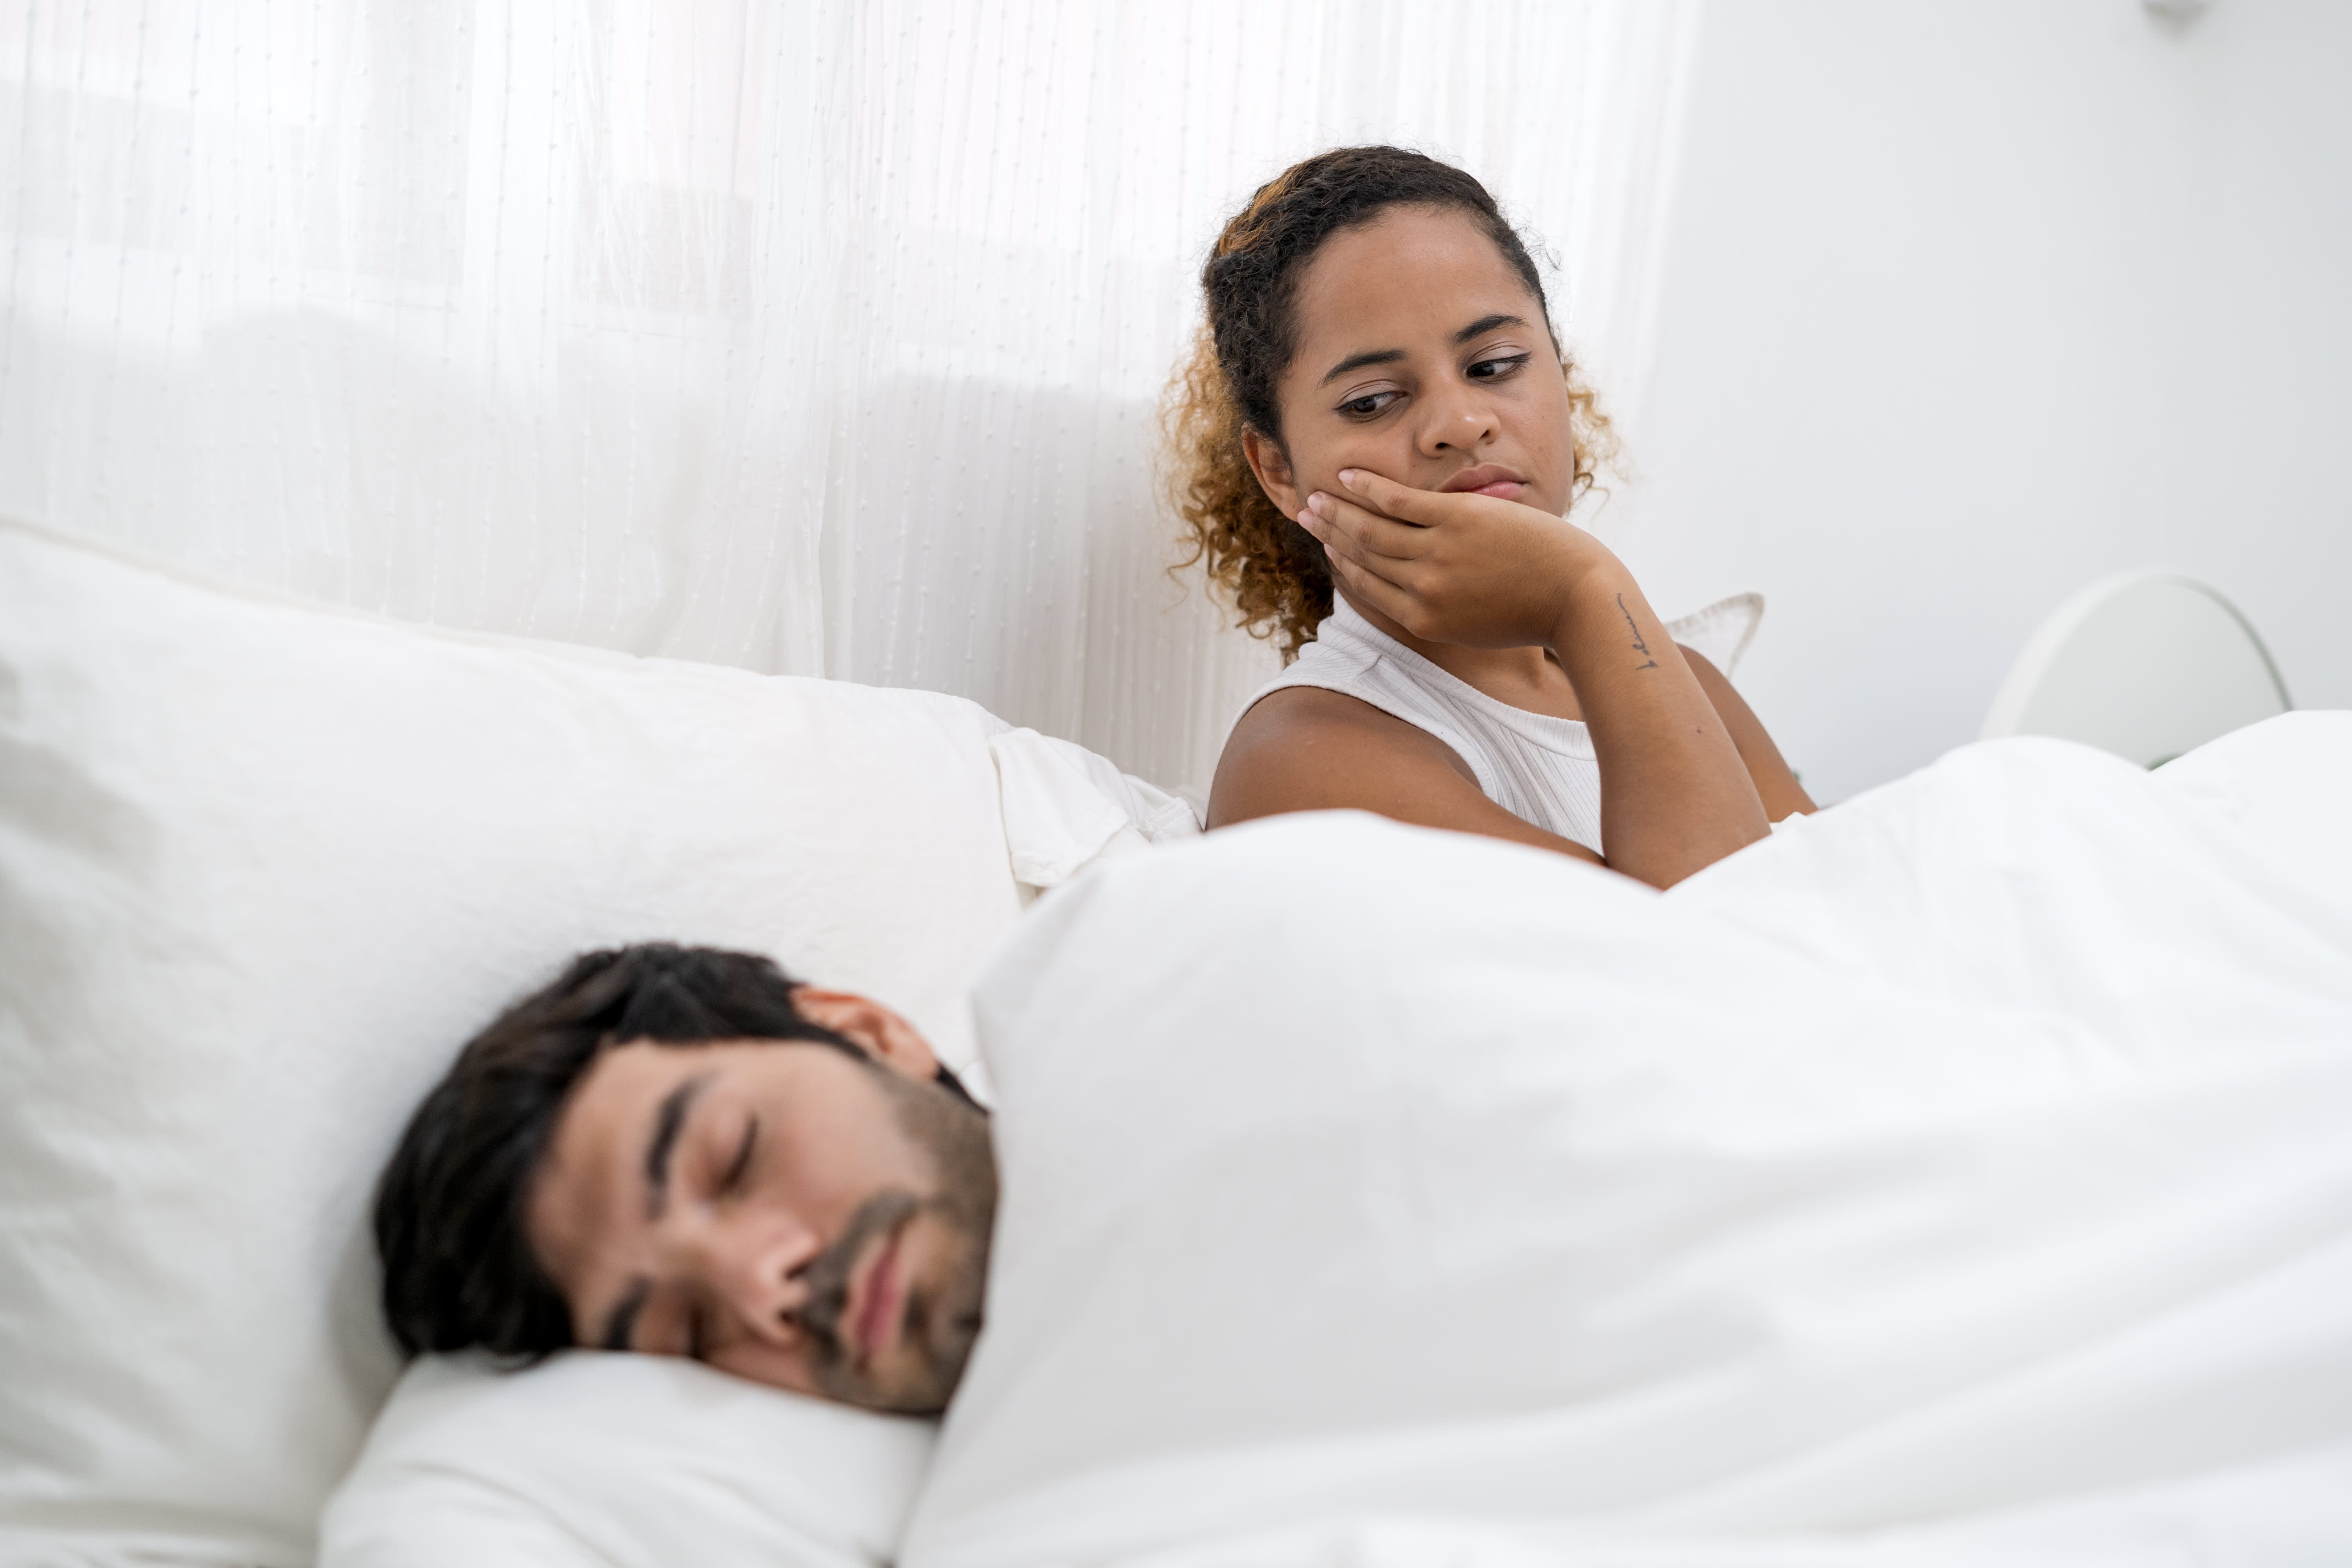 Do you and your partner need a sleep divorce? Heres what to consider and 4 tips from an expert pic